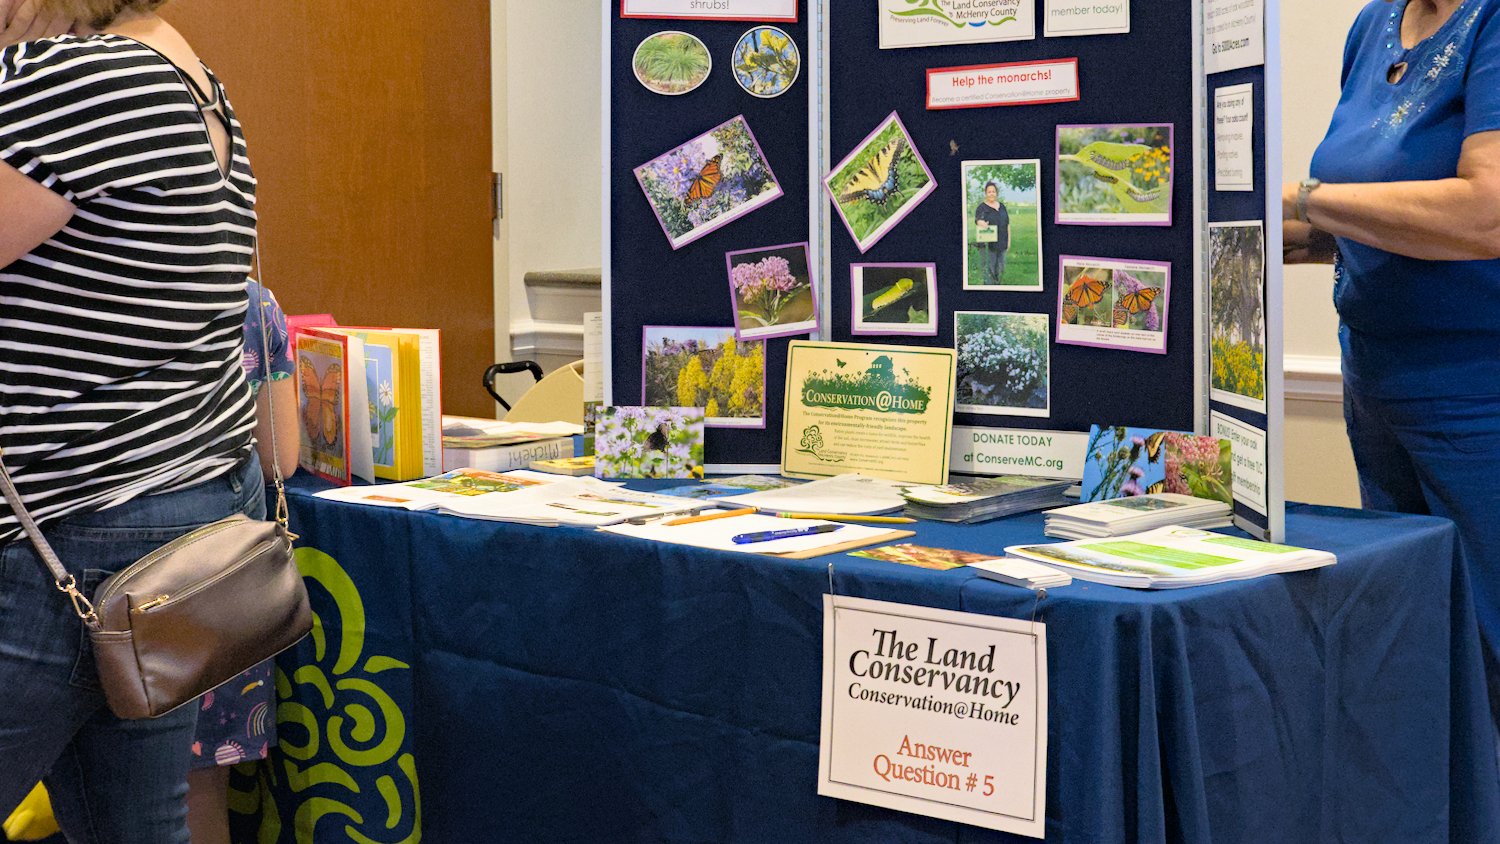 The Land Conservancy table.